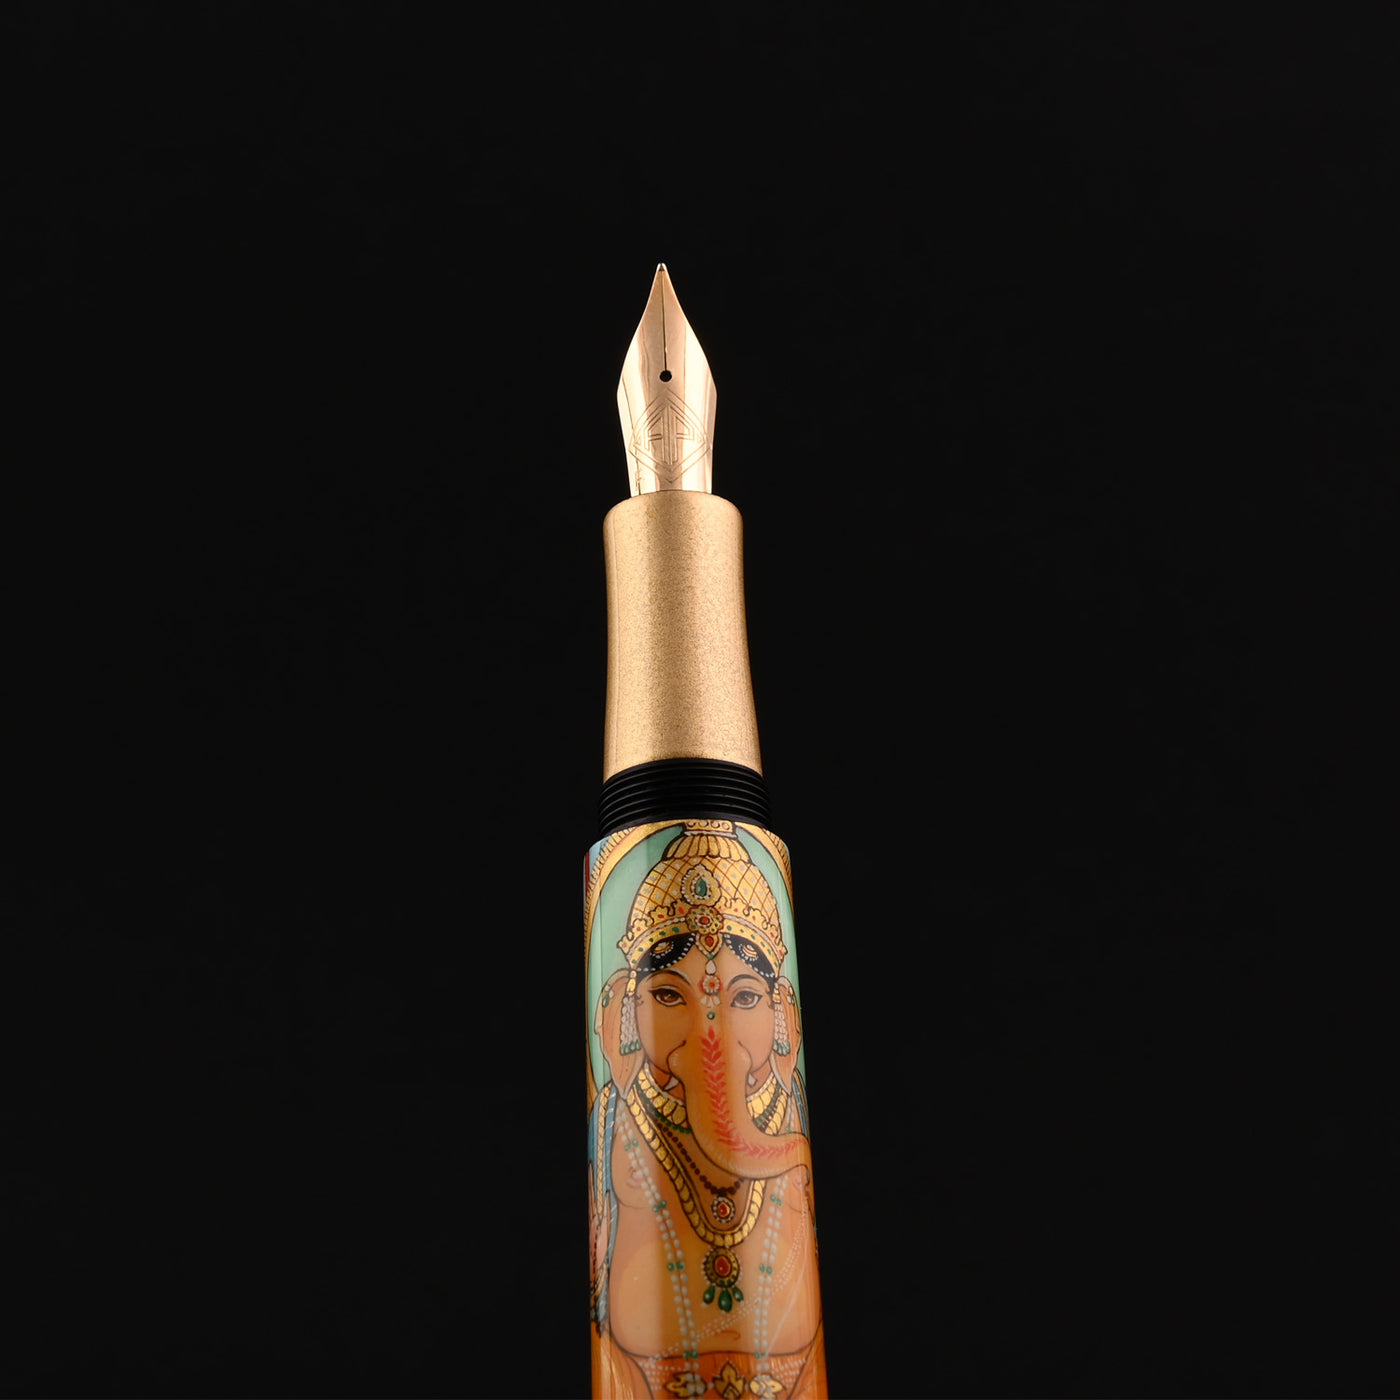 AP Limited Editions Russian Lacquer Art Fountain Pen - Ganesha (Limited Edition) 2